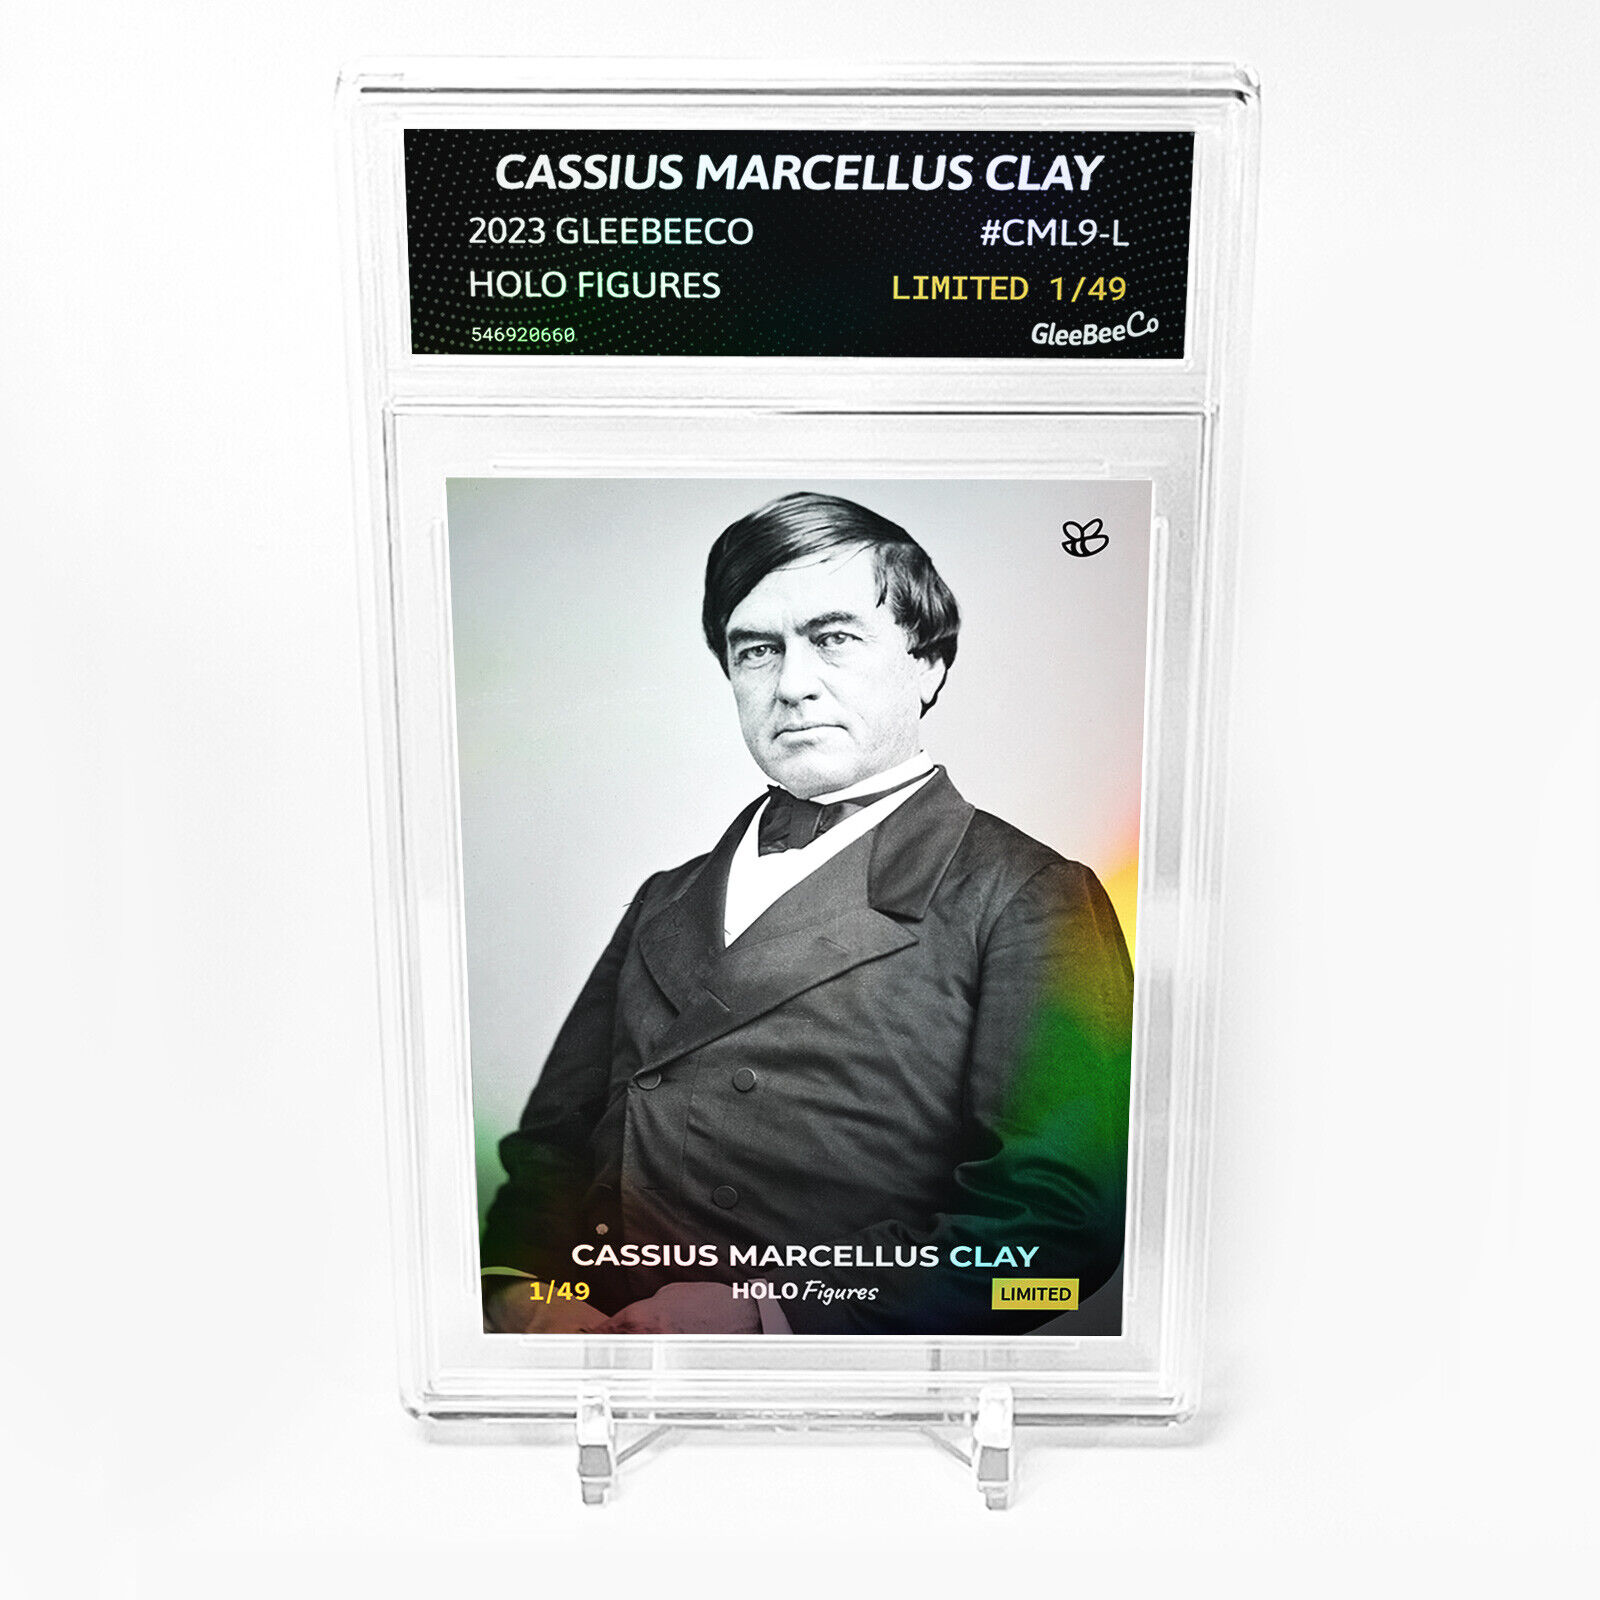 CASSIUS MARCELLUS CLAY Holographic Card 2023 GleeBeeCo #CML9-L LIMITED to /49